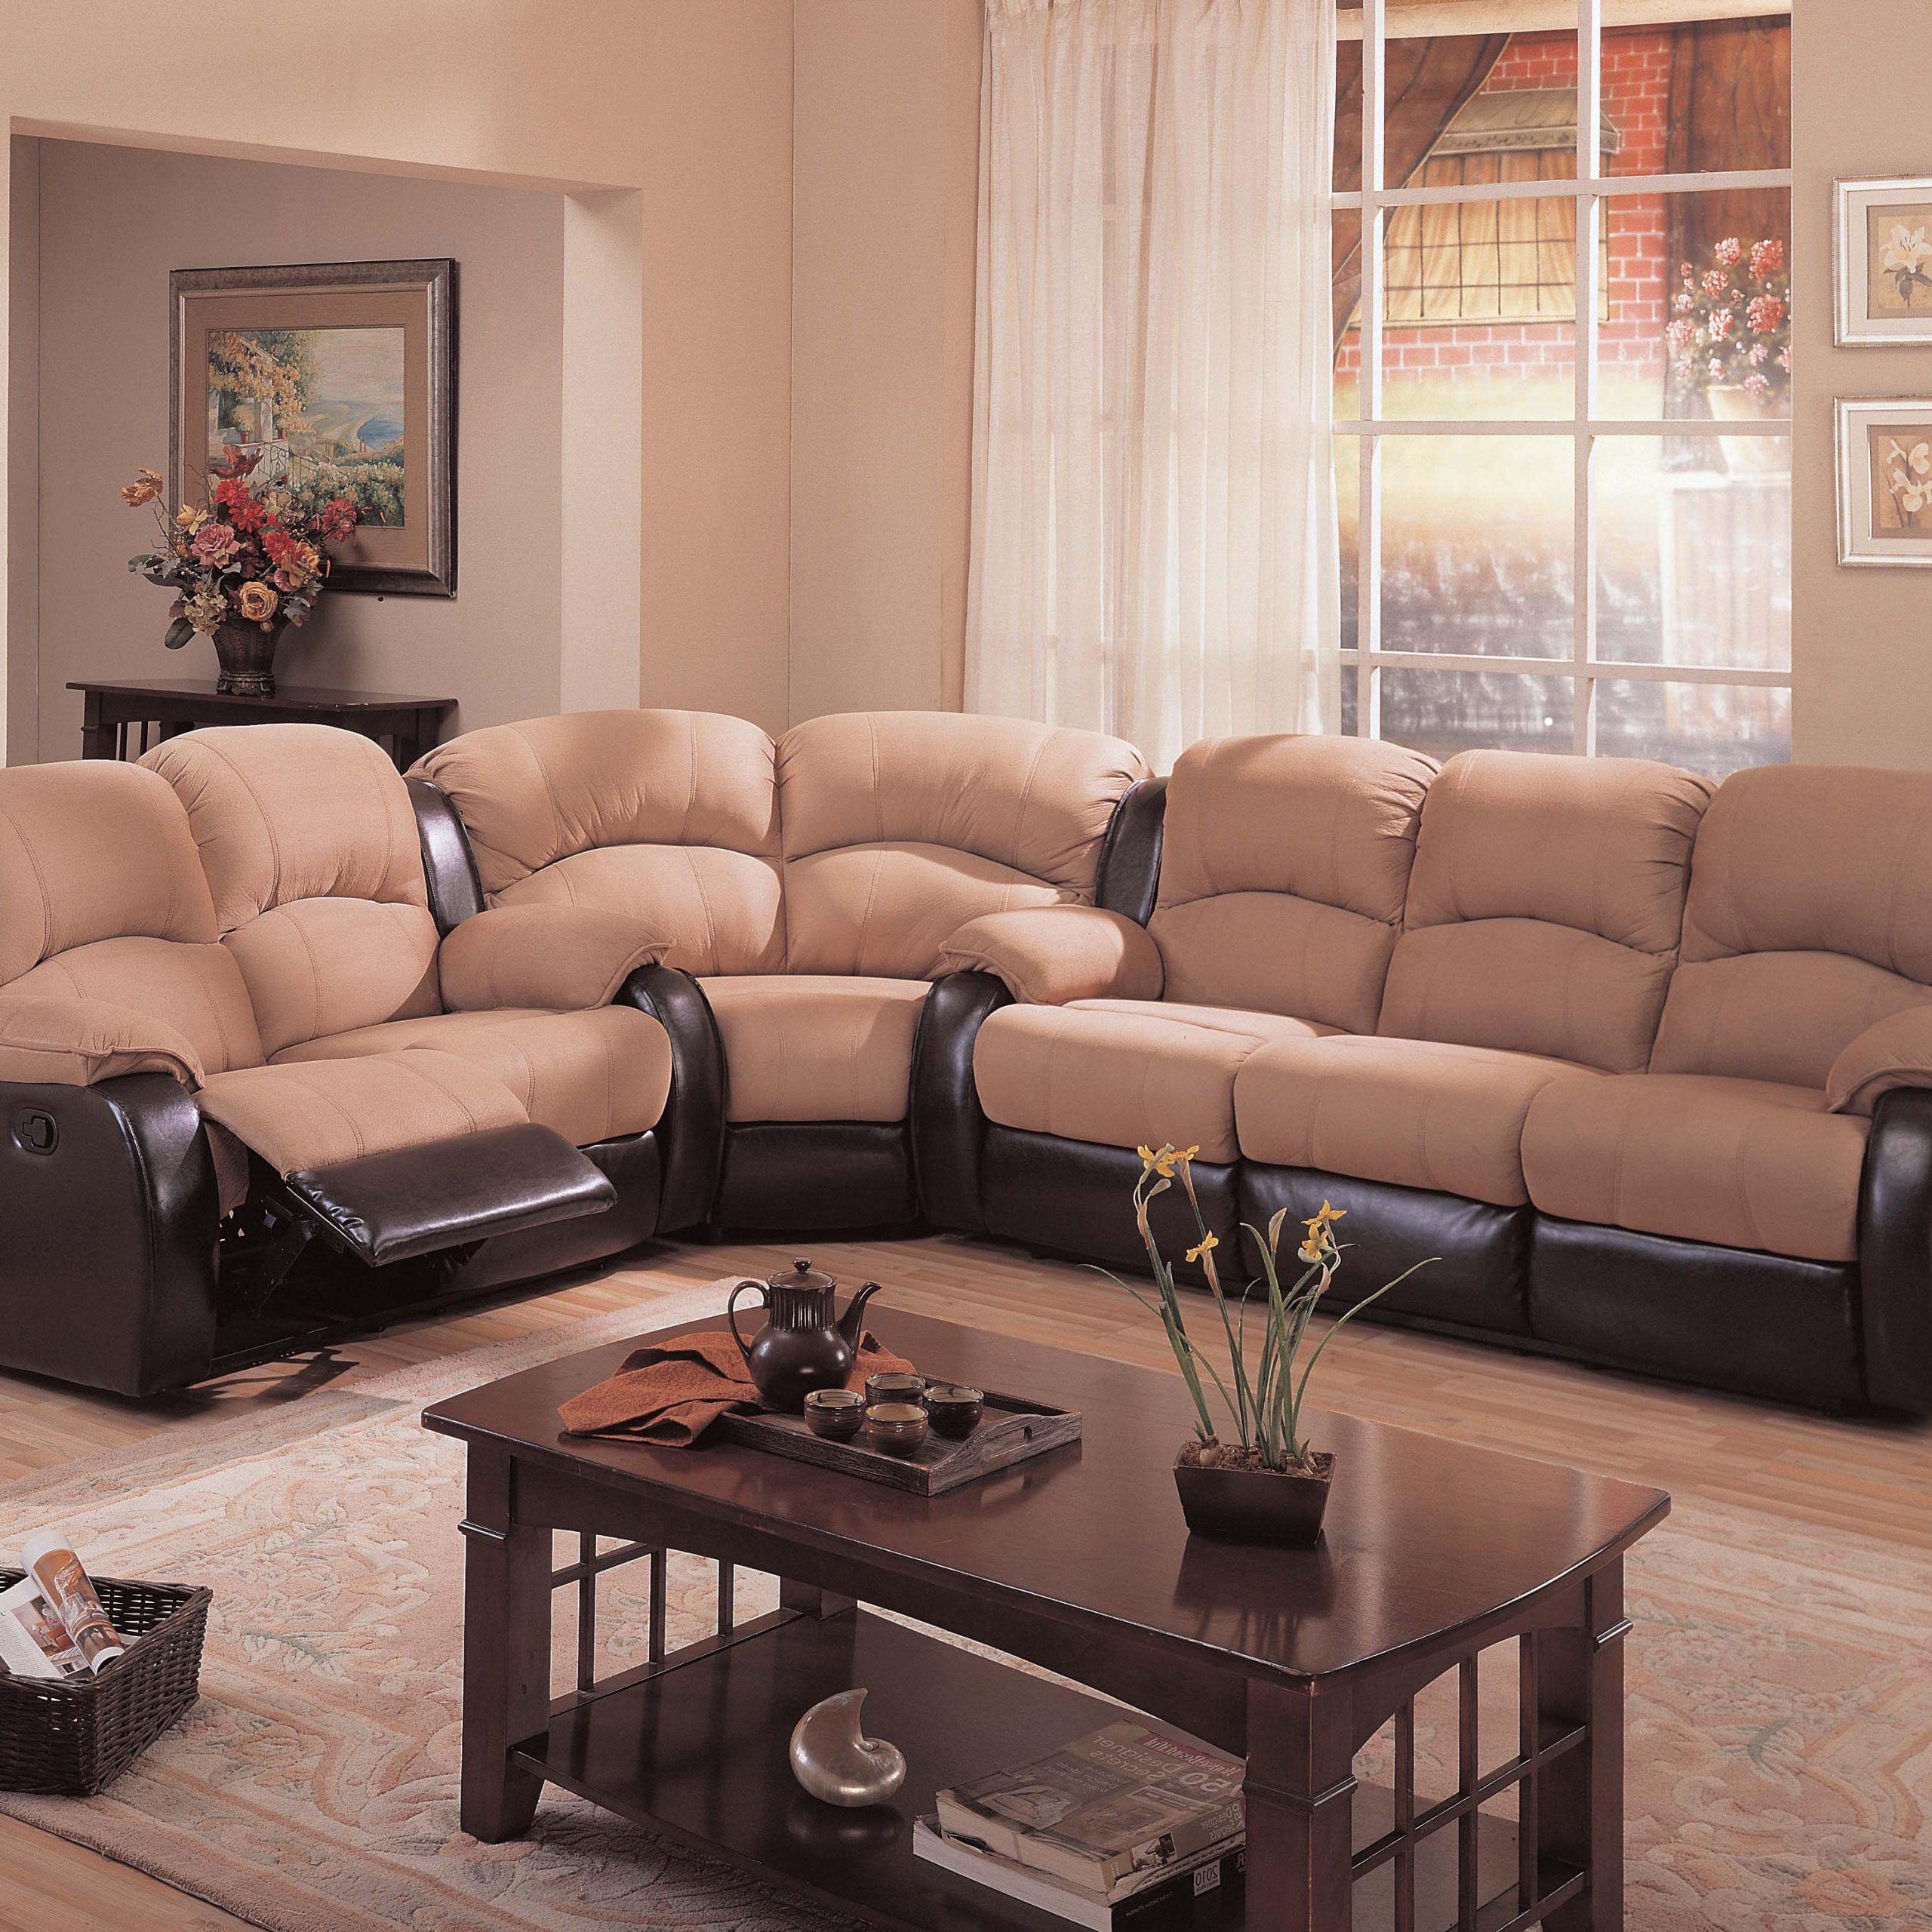 Microfiber Sectional Couch With Recliner: Chic Features For Your Home In Microfiber Sectional Corner Sofas (Gallery 5 of 20)